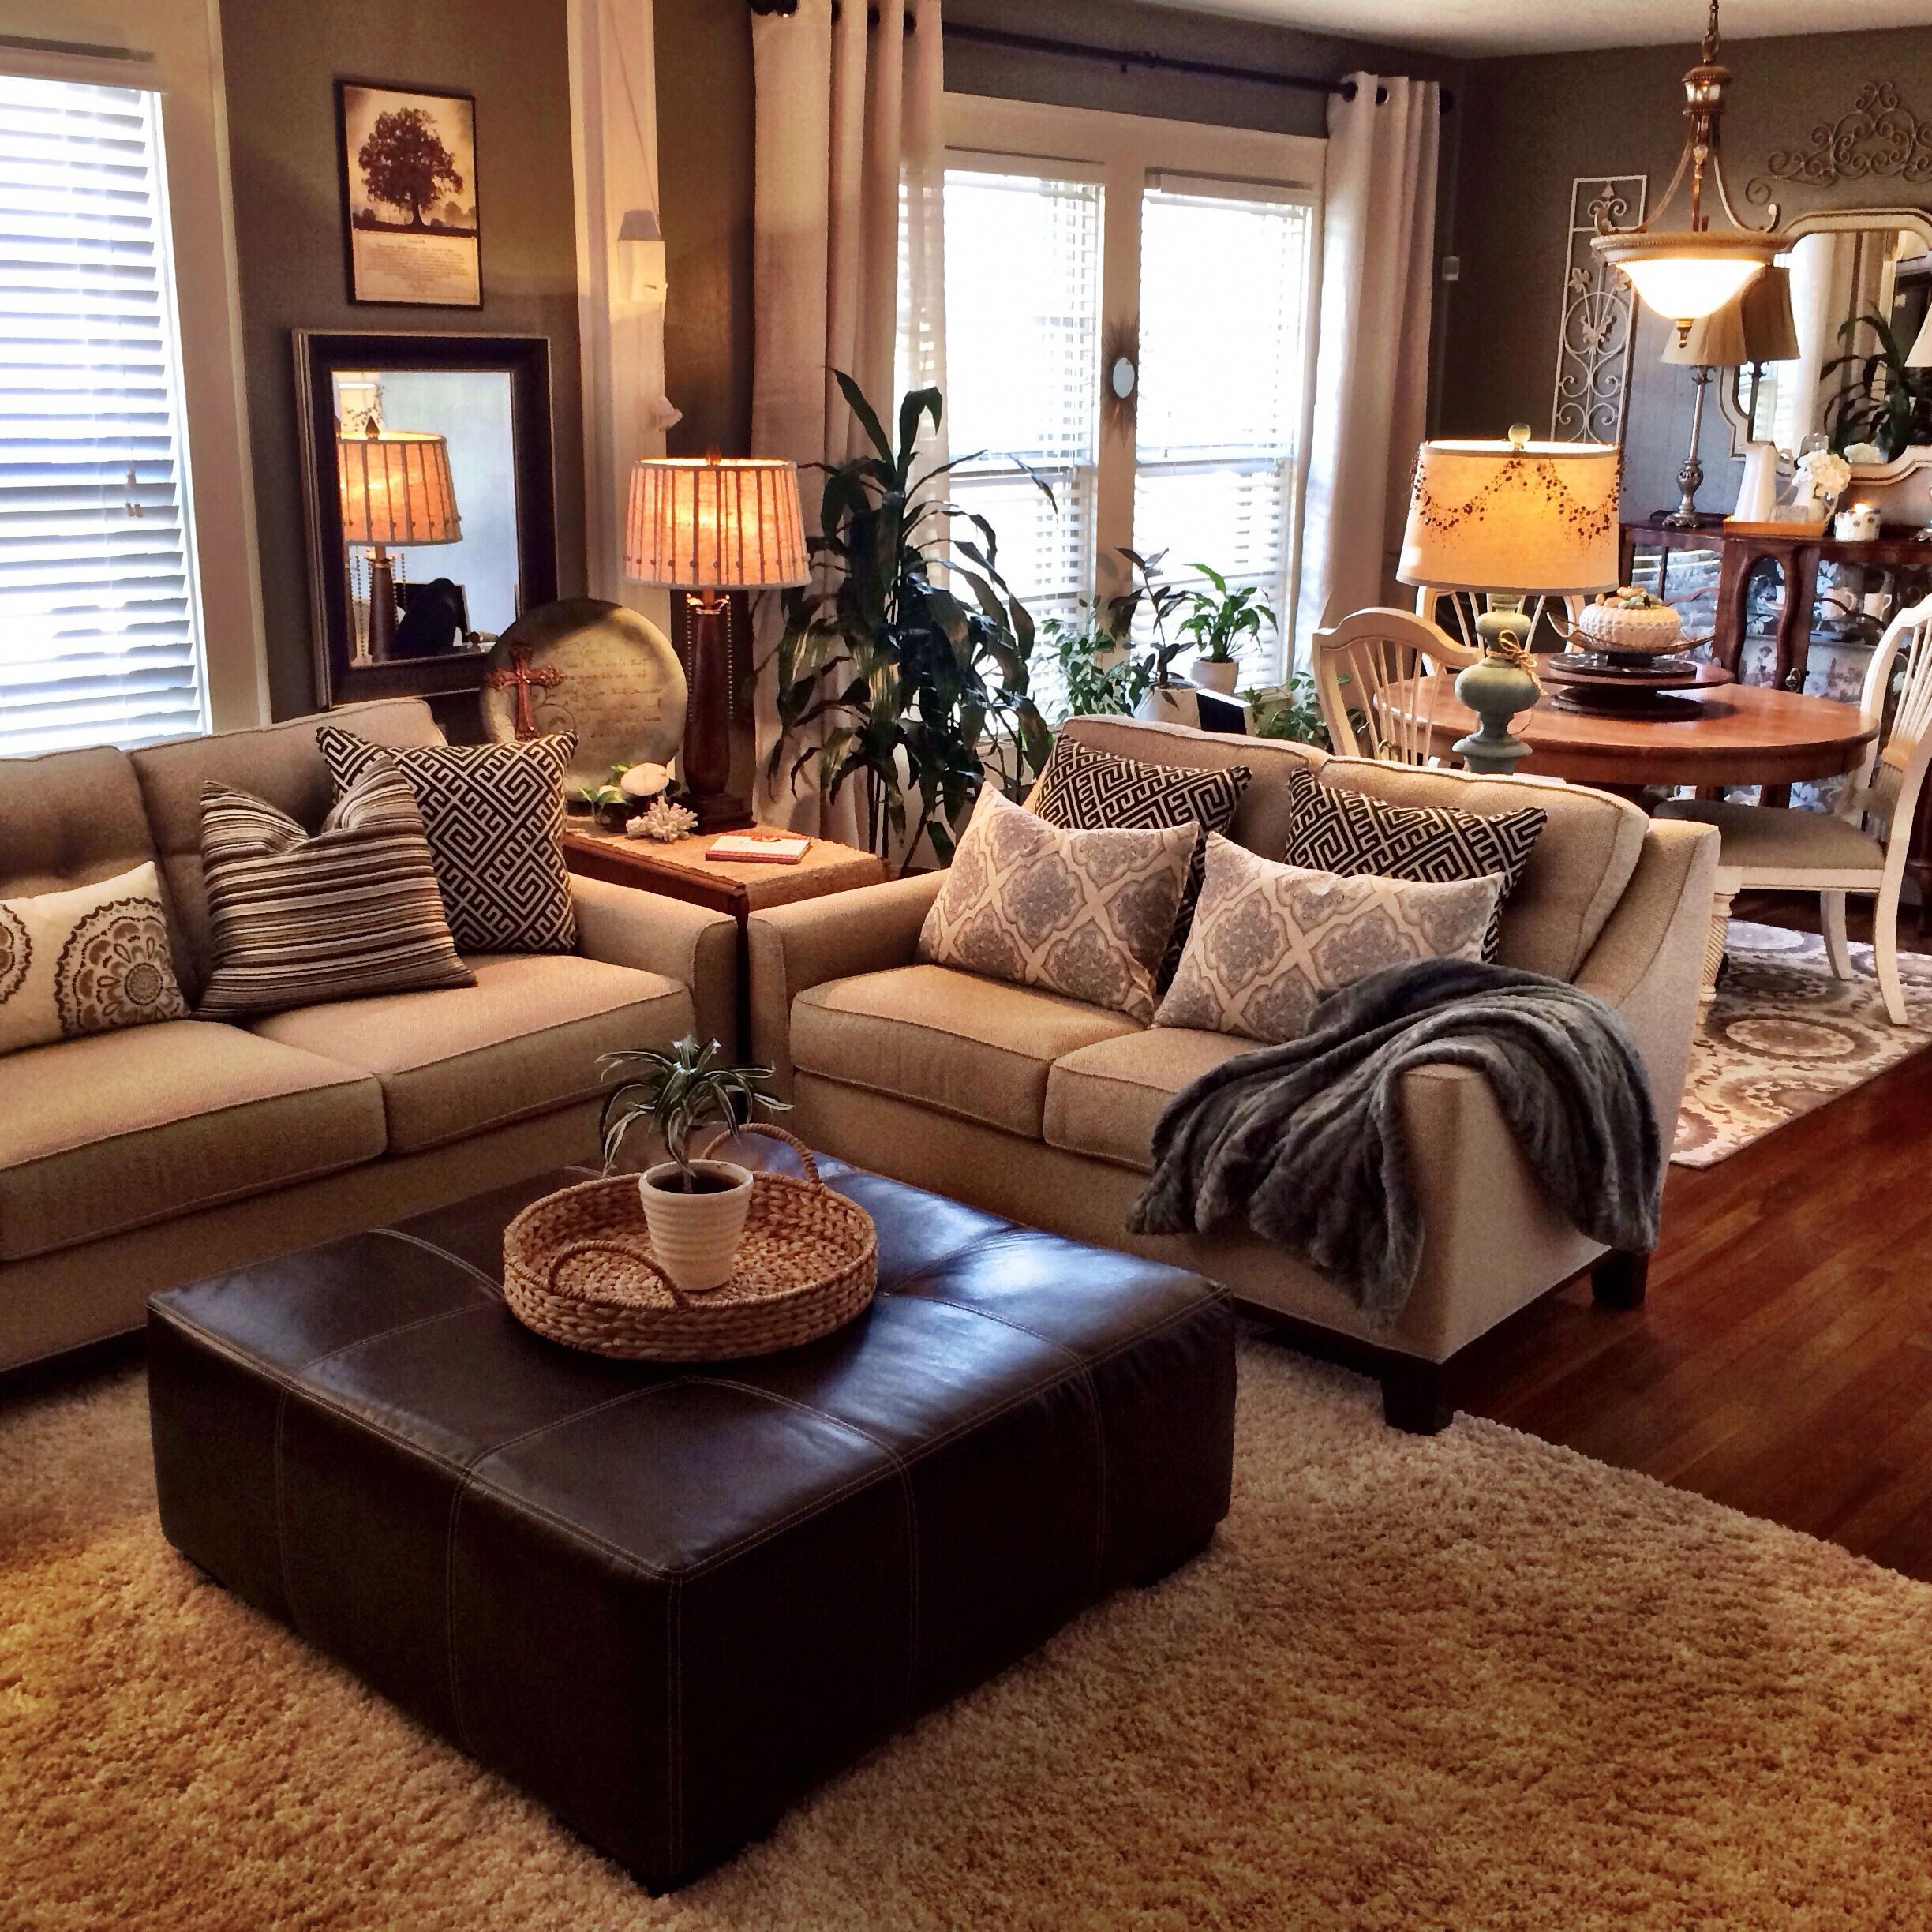 Bring Warmth Into Your Home With These Cozy Living Room Ideas